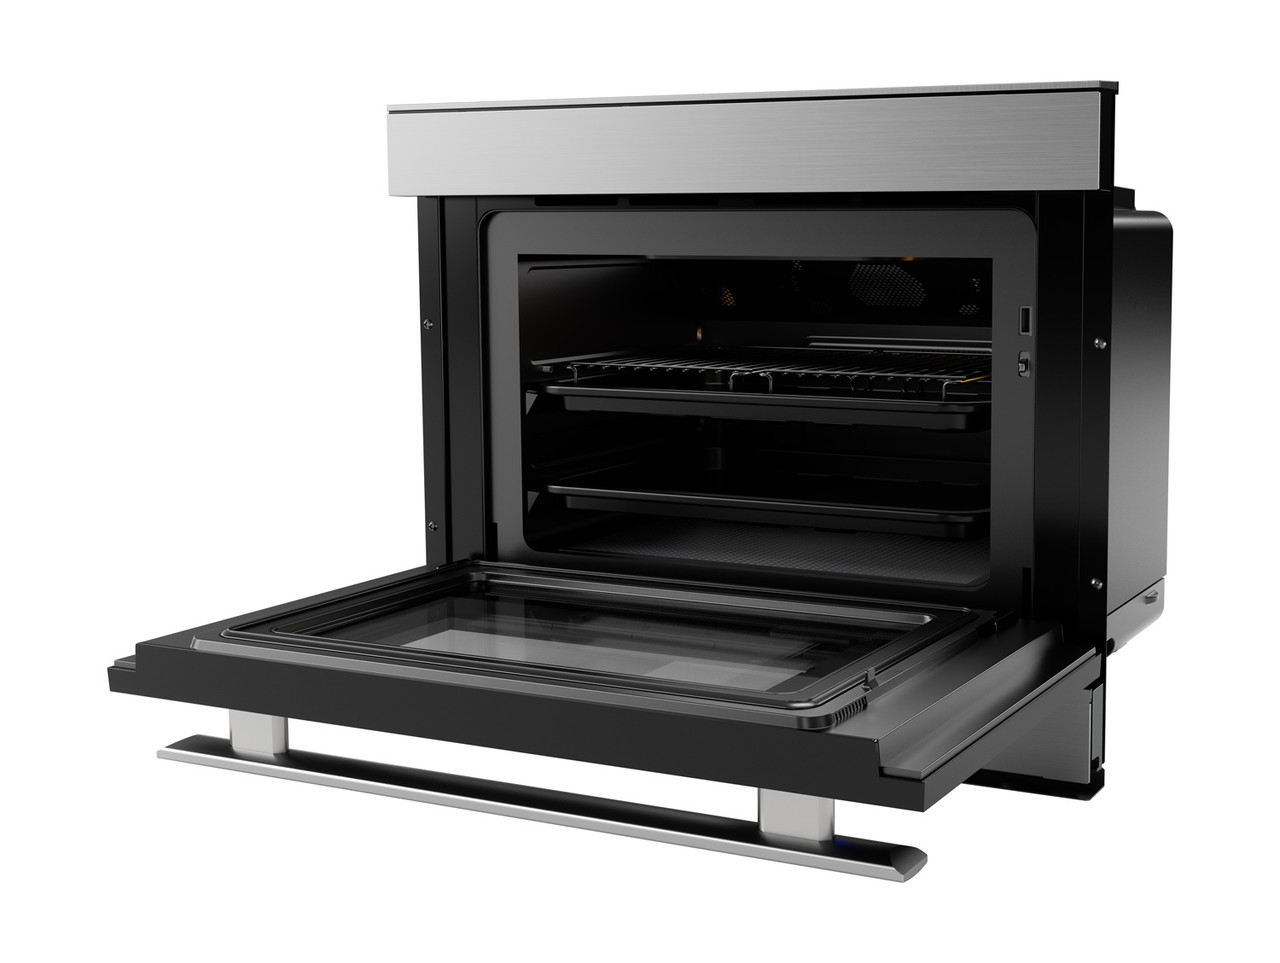 Left side view of the SuperSteam+ Smart Oven (SSC2489DS) with door open - Sharp’s Superheated Steam Oven